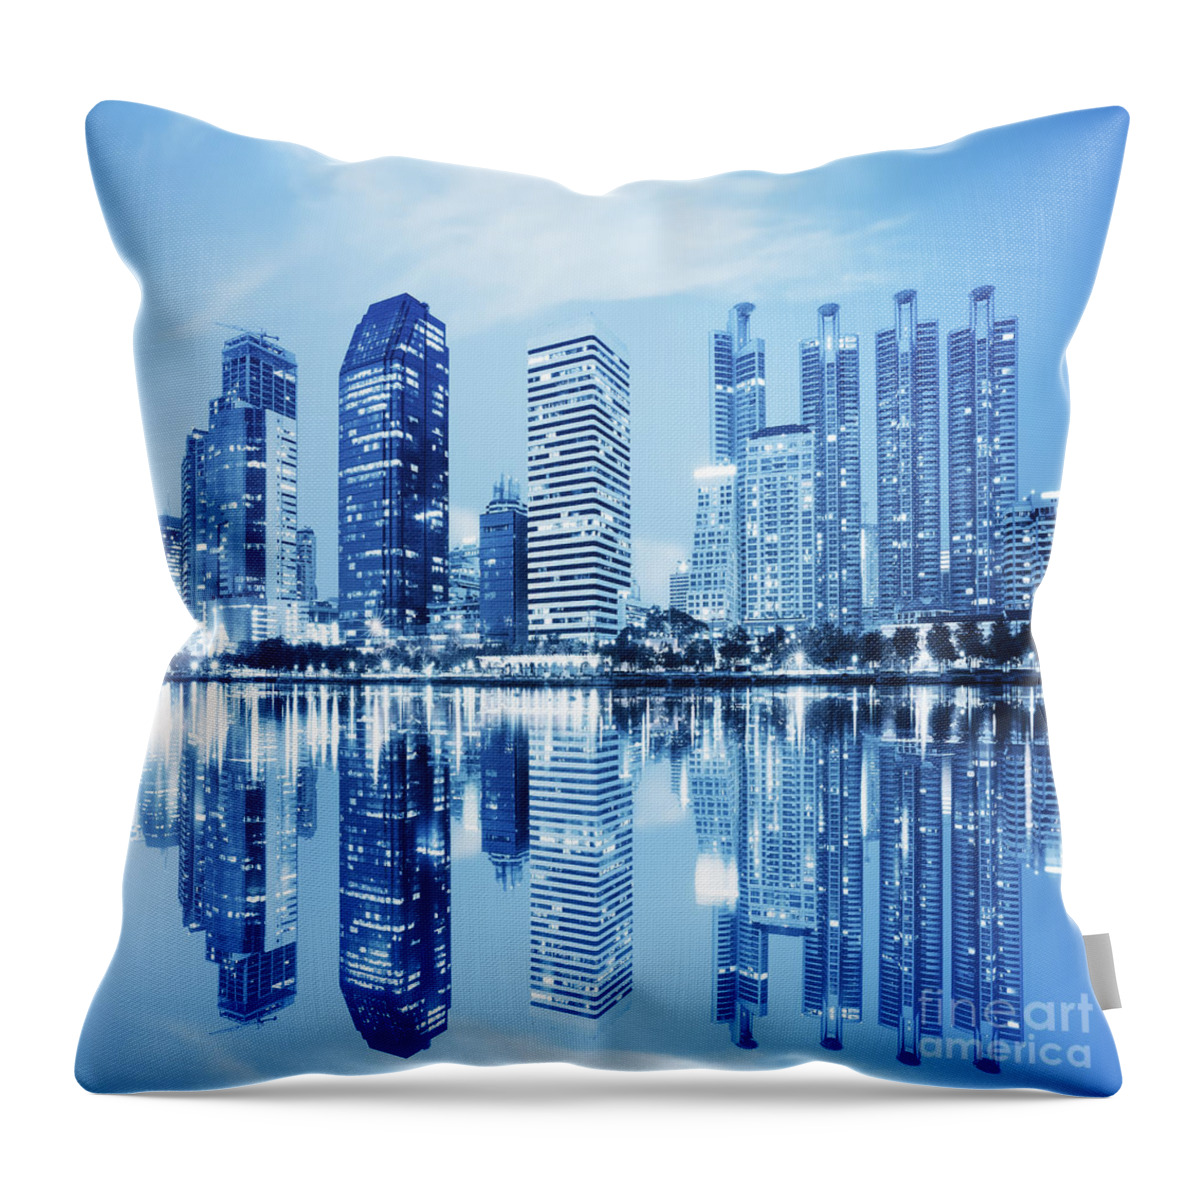 Architecture Throw Pillow featuring the photograph Night Scenes Of City by Setsiri Silapasuwanchai